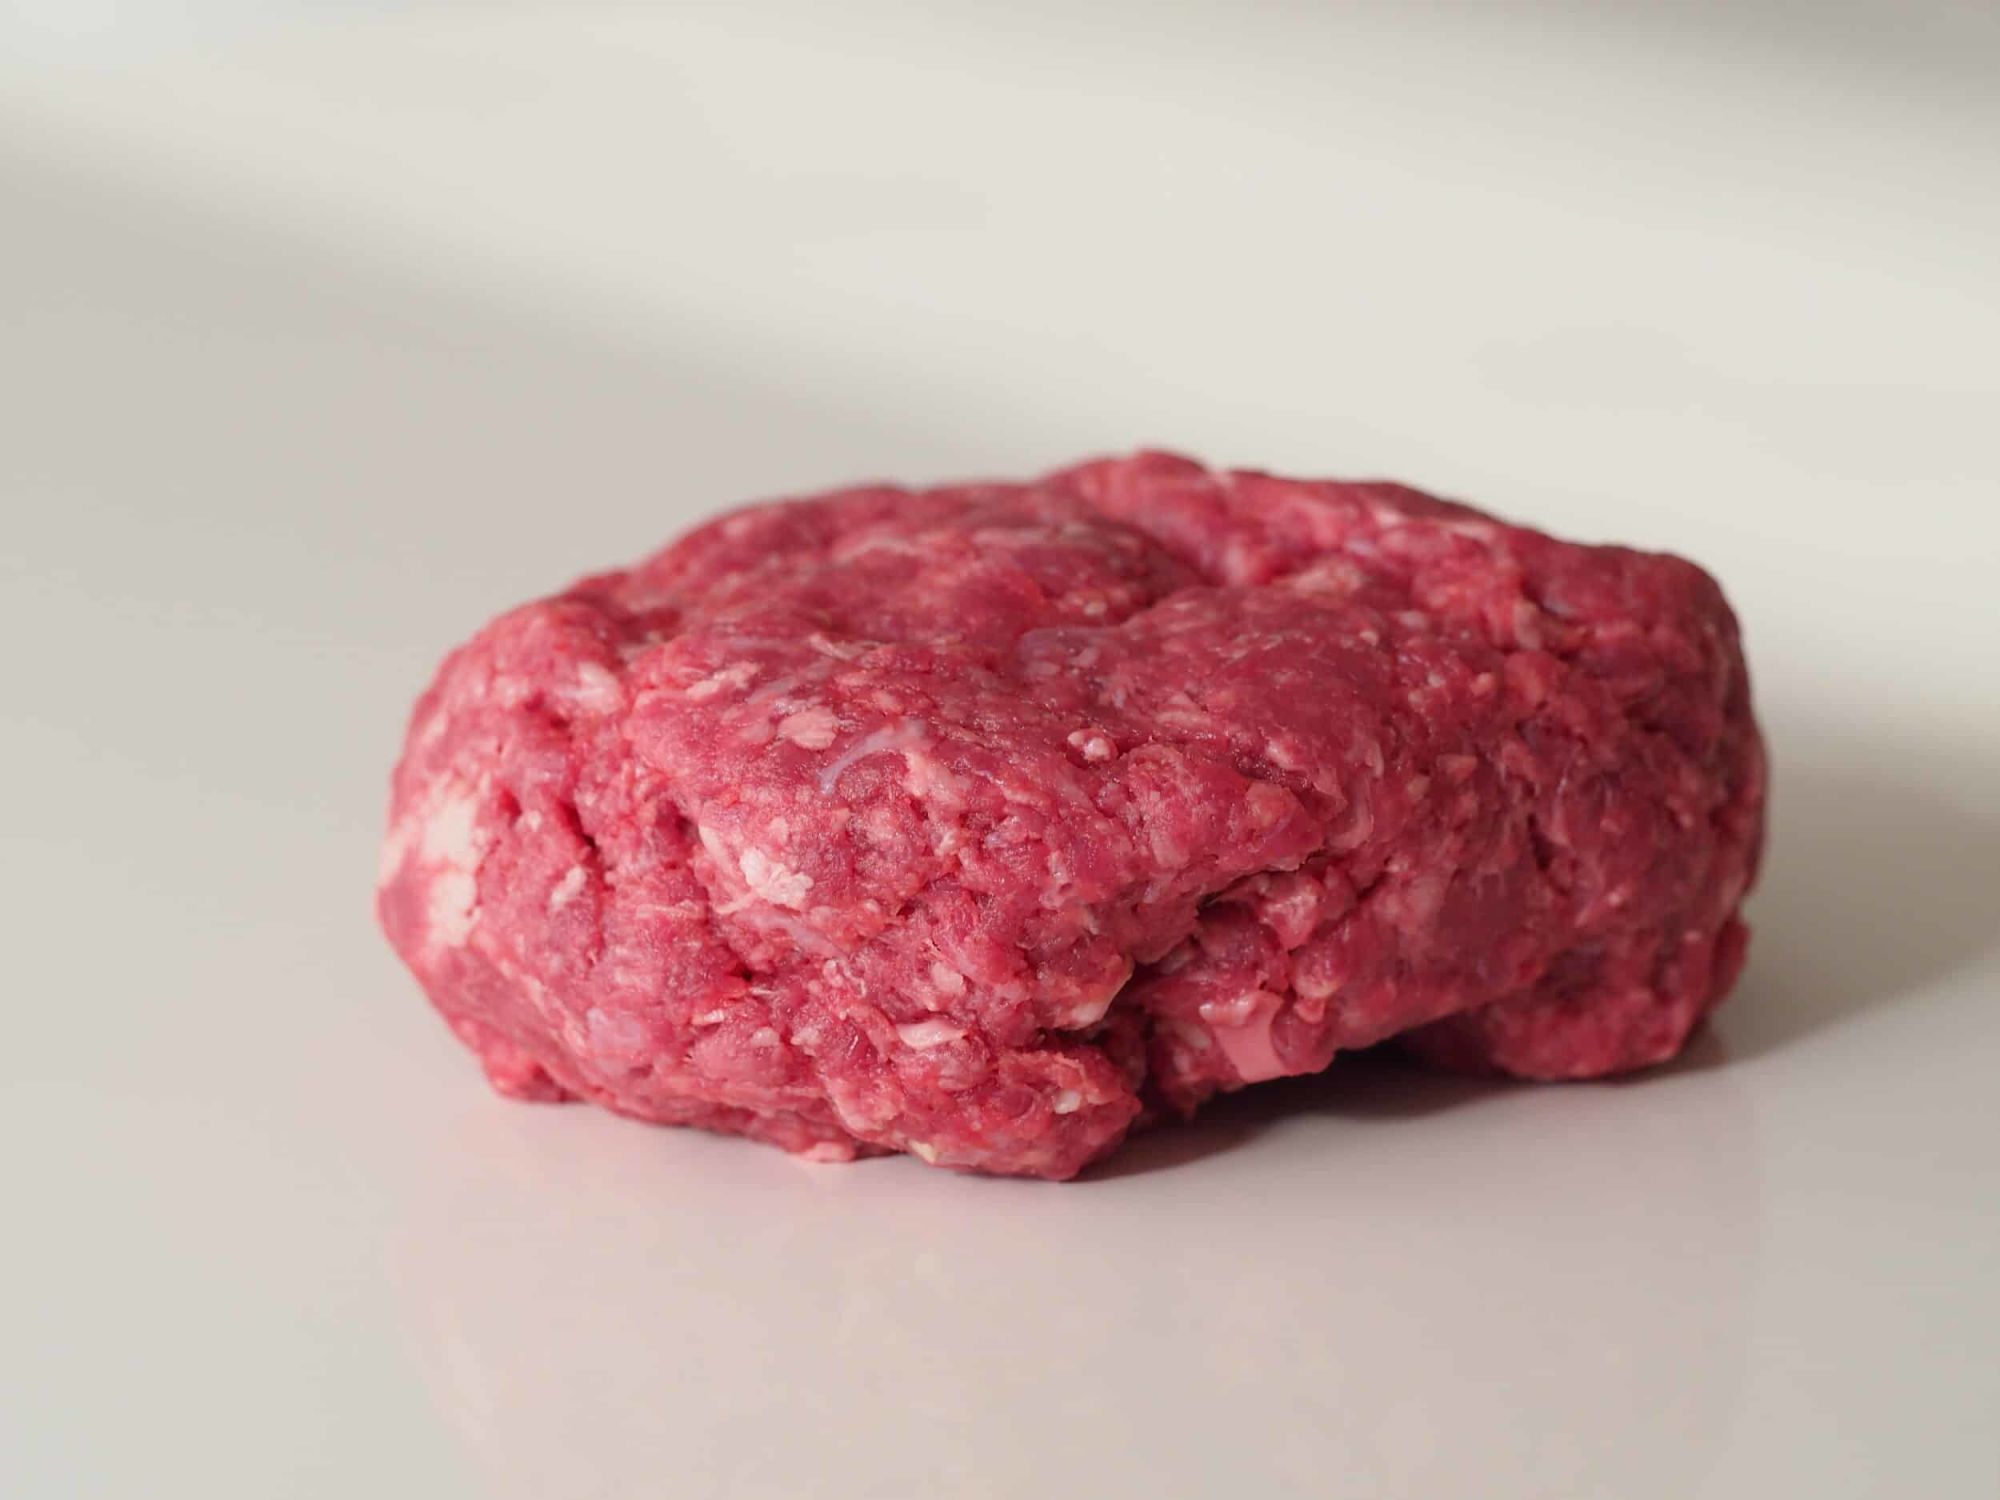 Ground Beef for Babies - Hamburgers for Babies